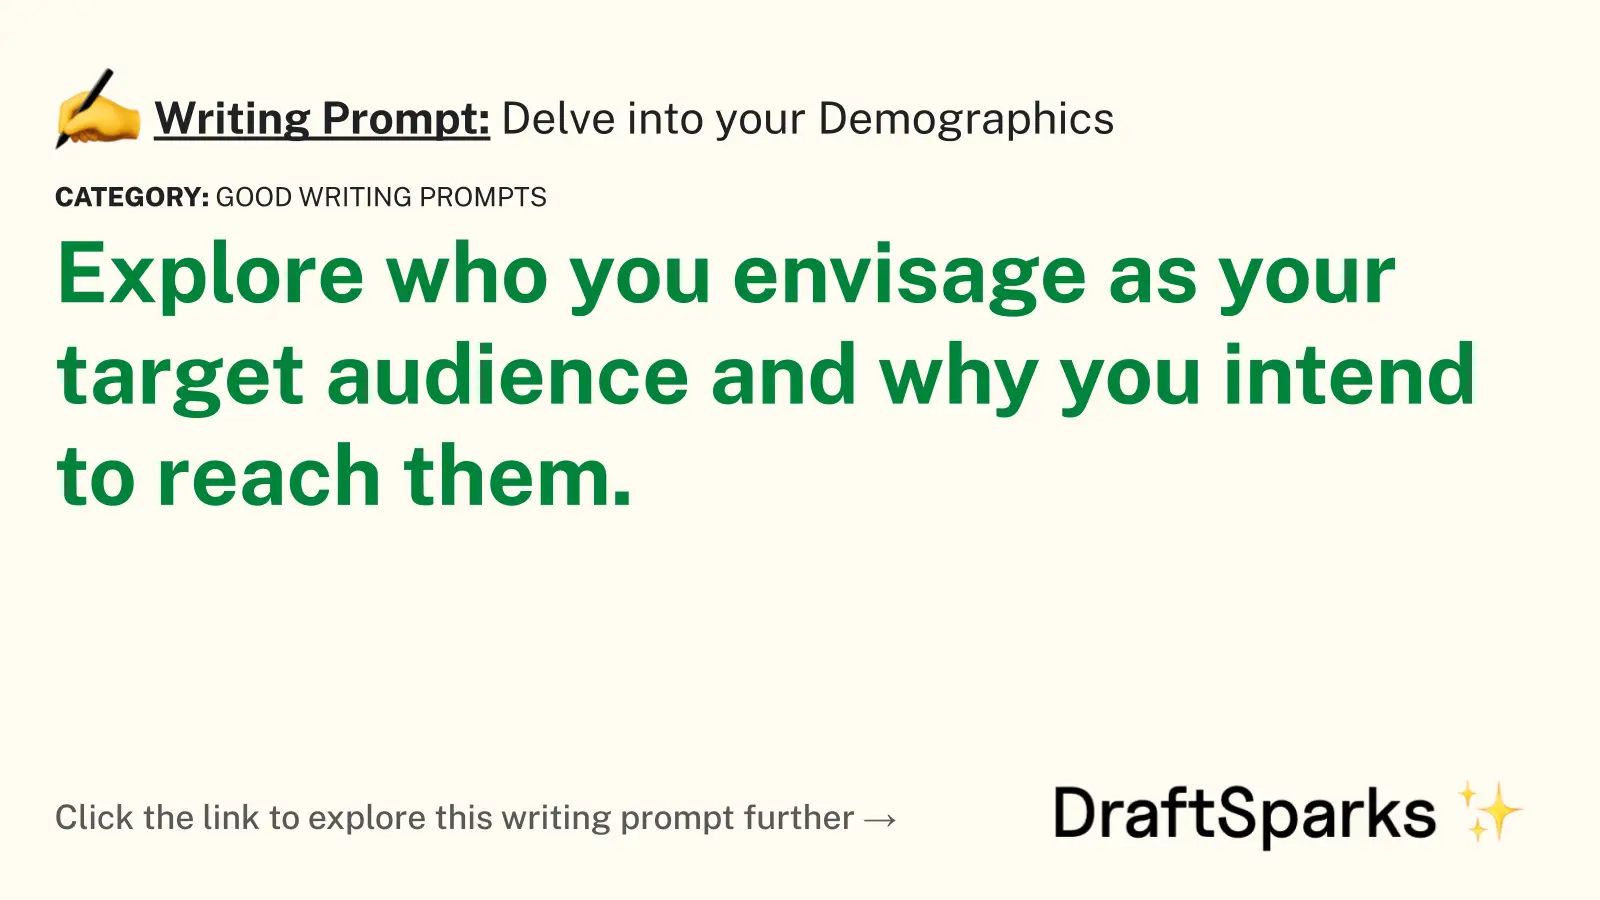 Delve into your Demographics